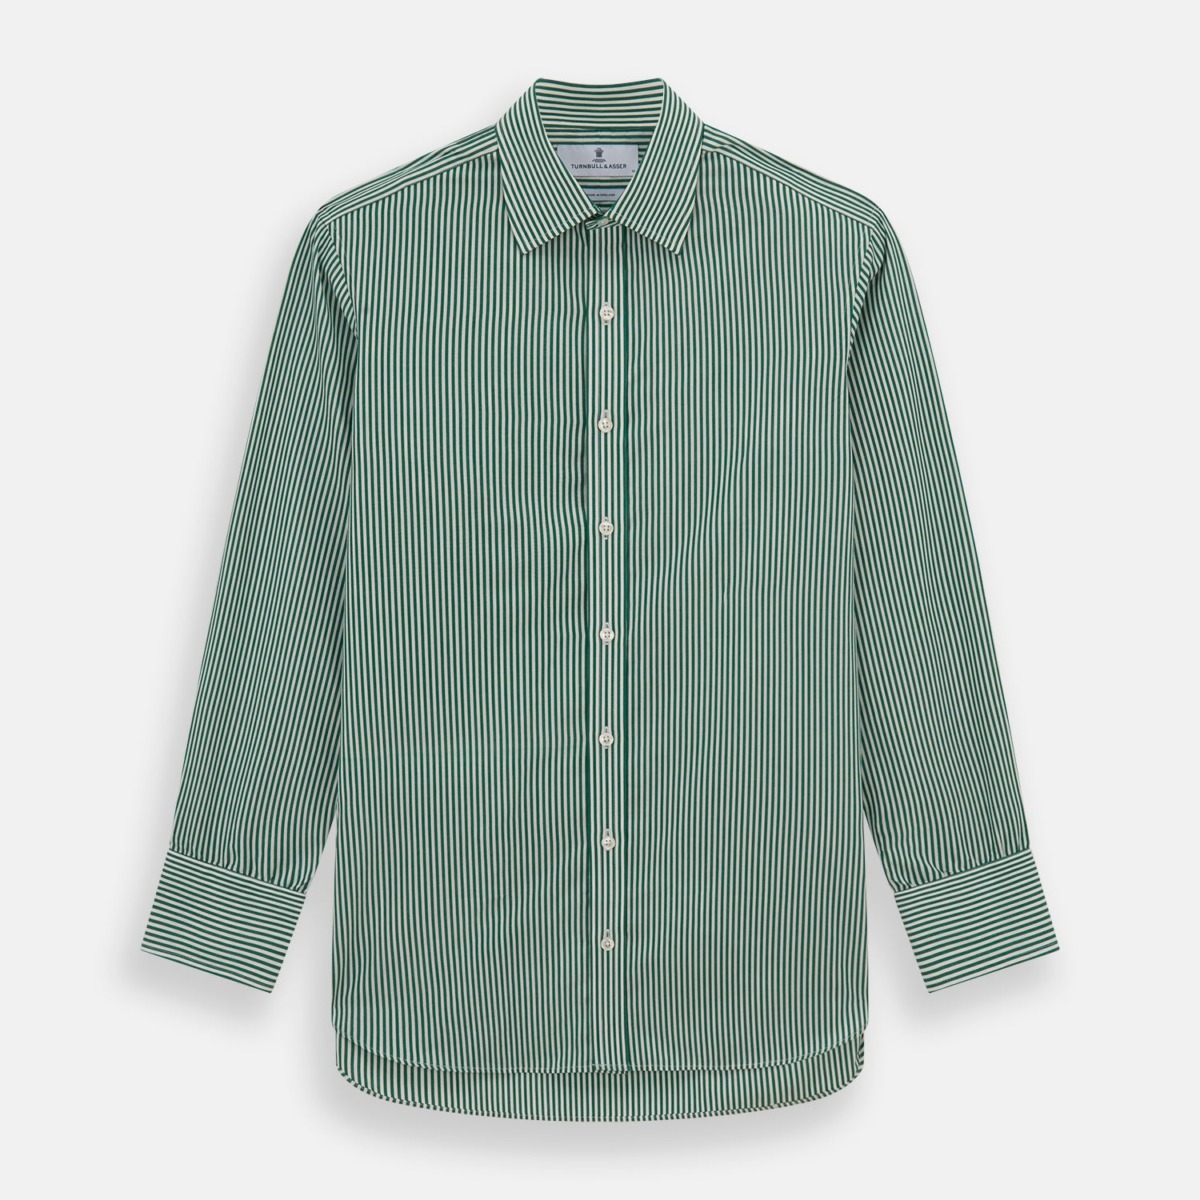 Turnbull And Asser Gents Green Shirt from Turnbull & Asser GOOFASH